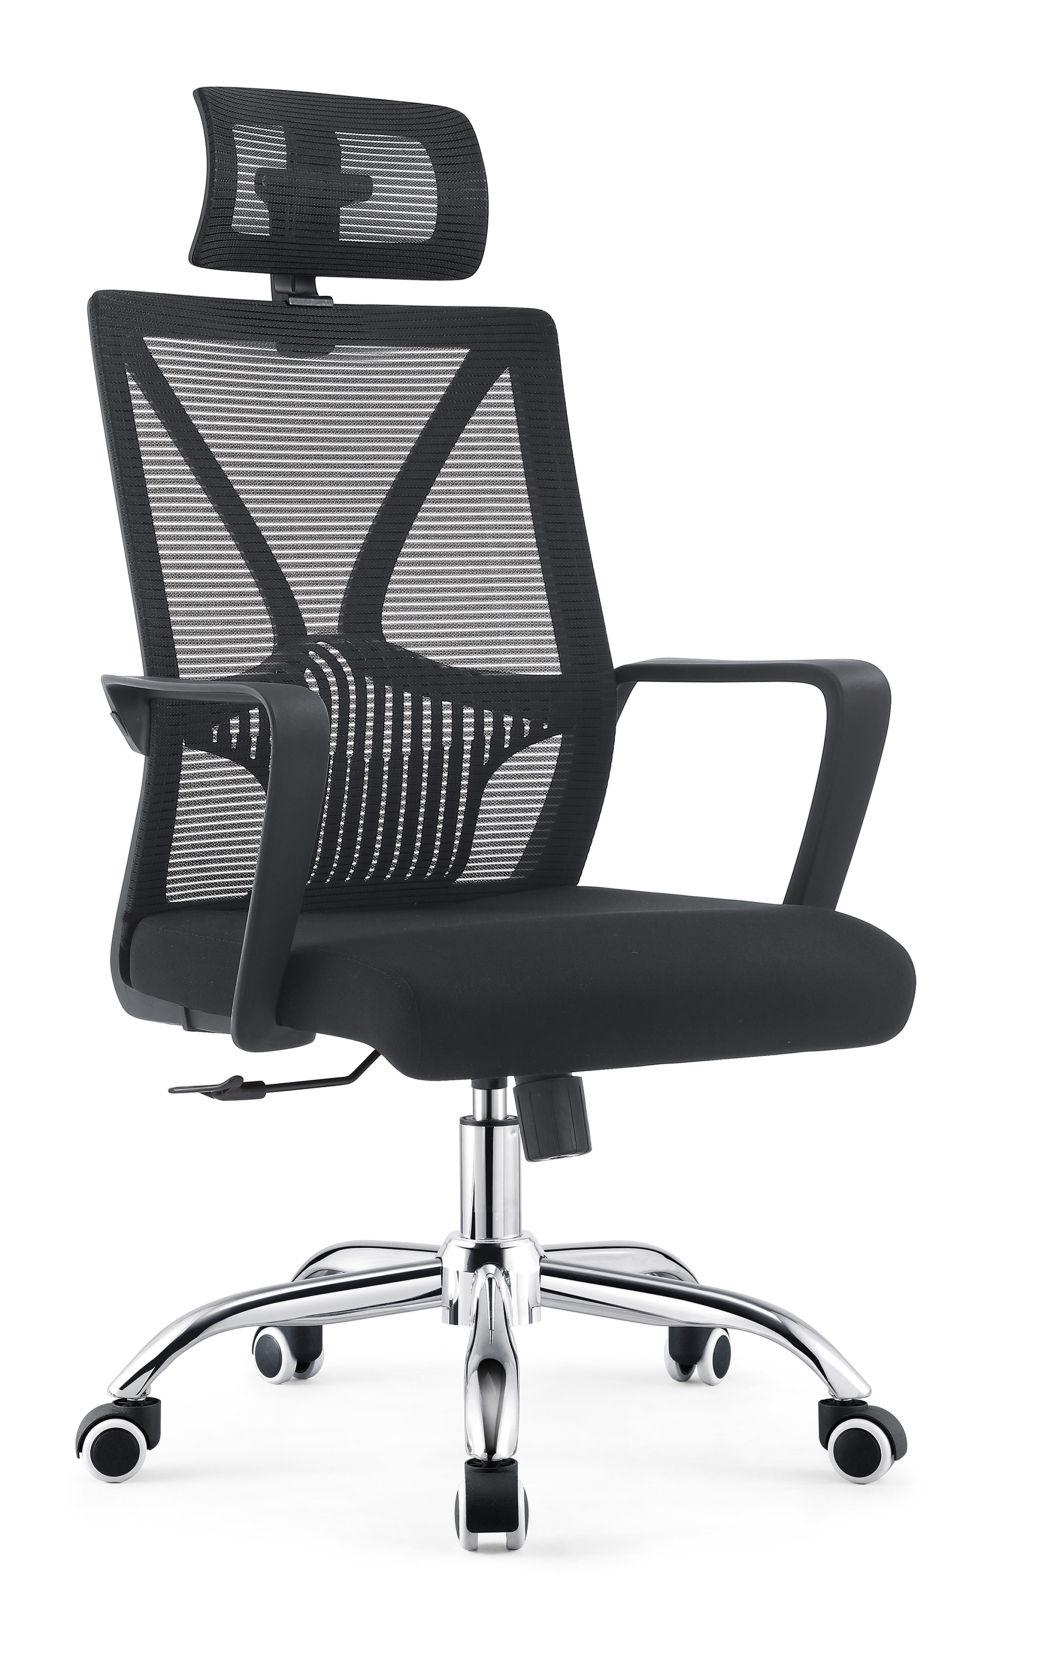 Adjustable Mesh Back Office Chair with Headrest-1921A (BIFMA)